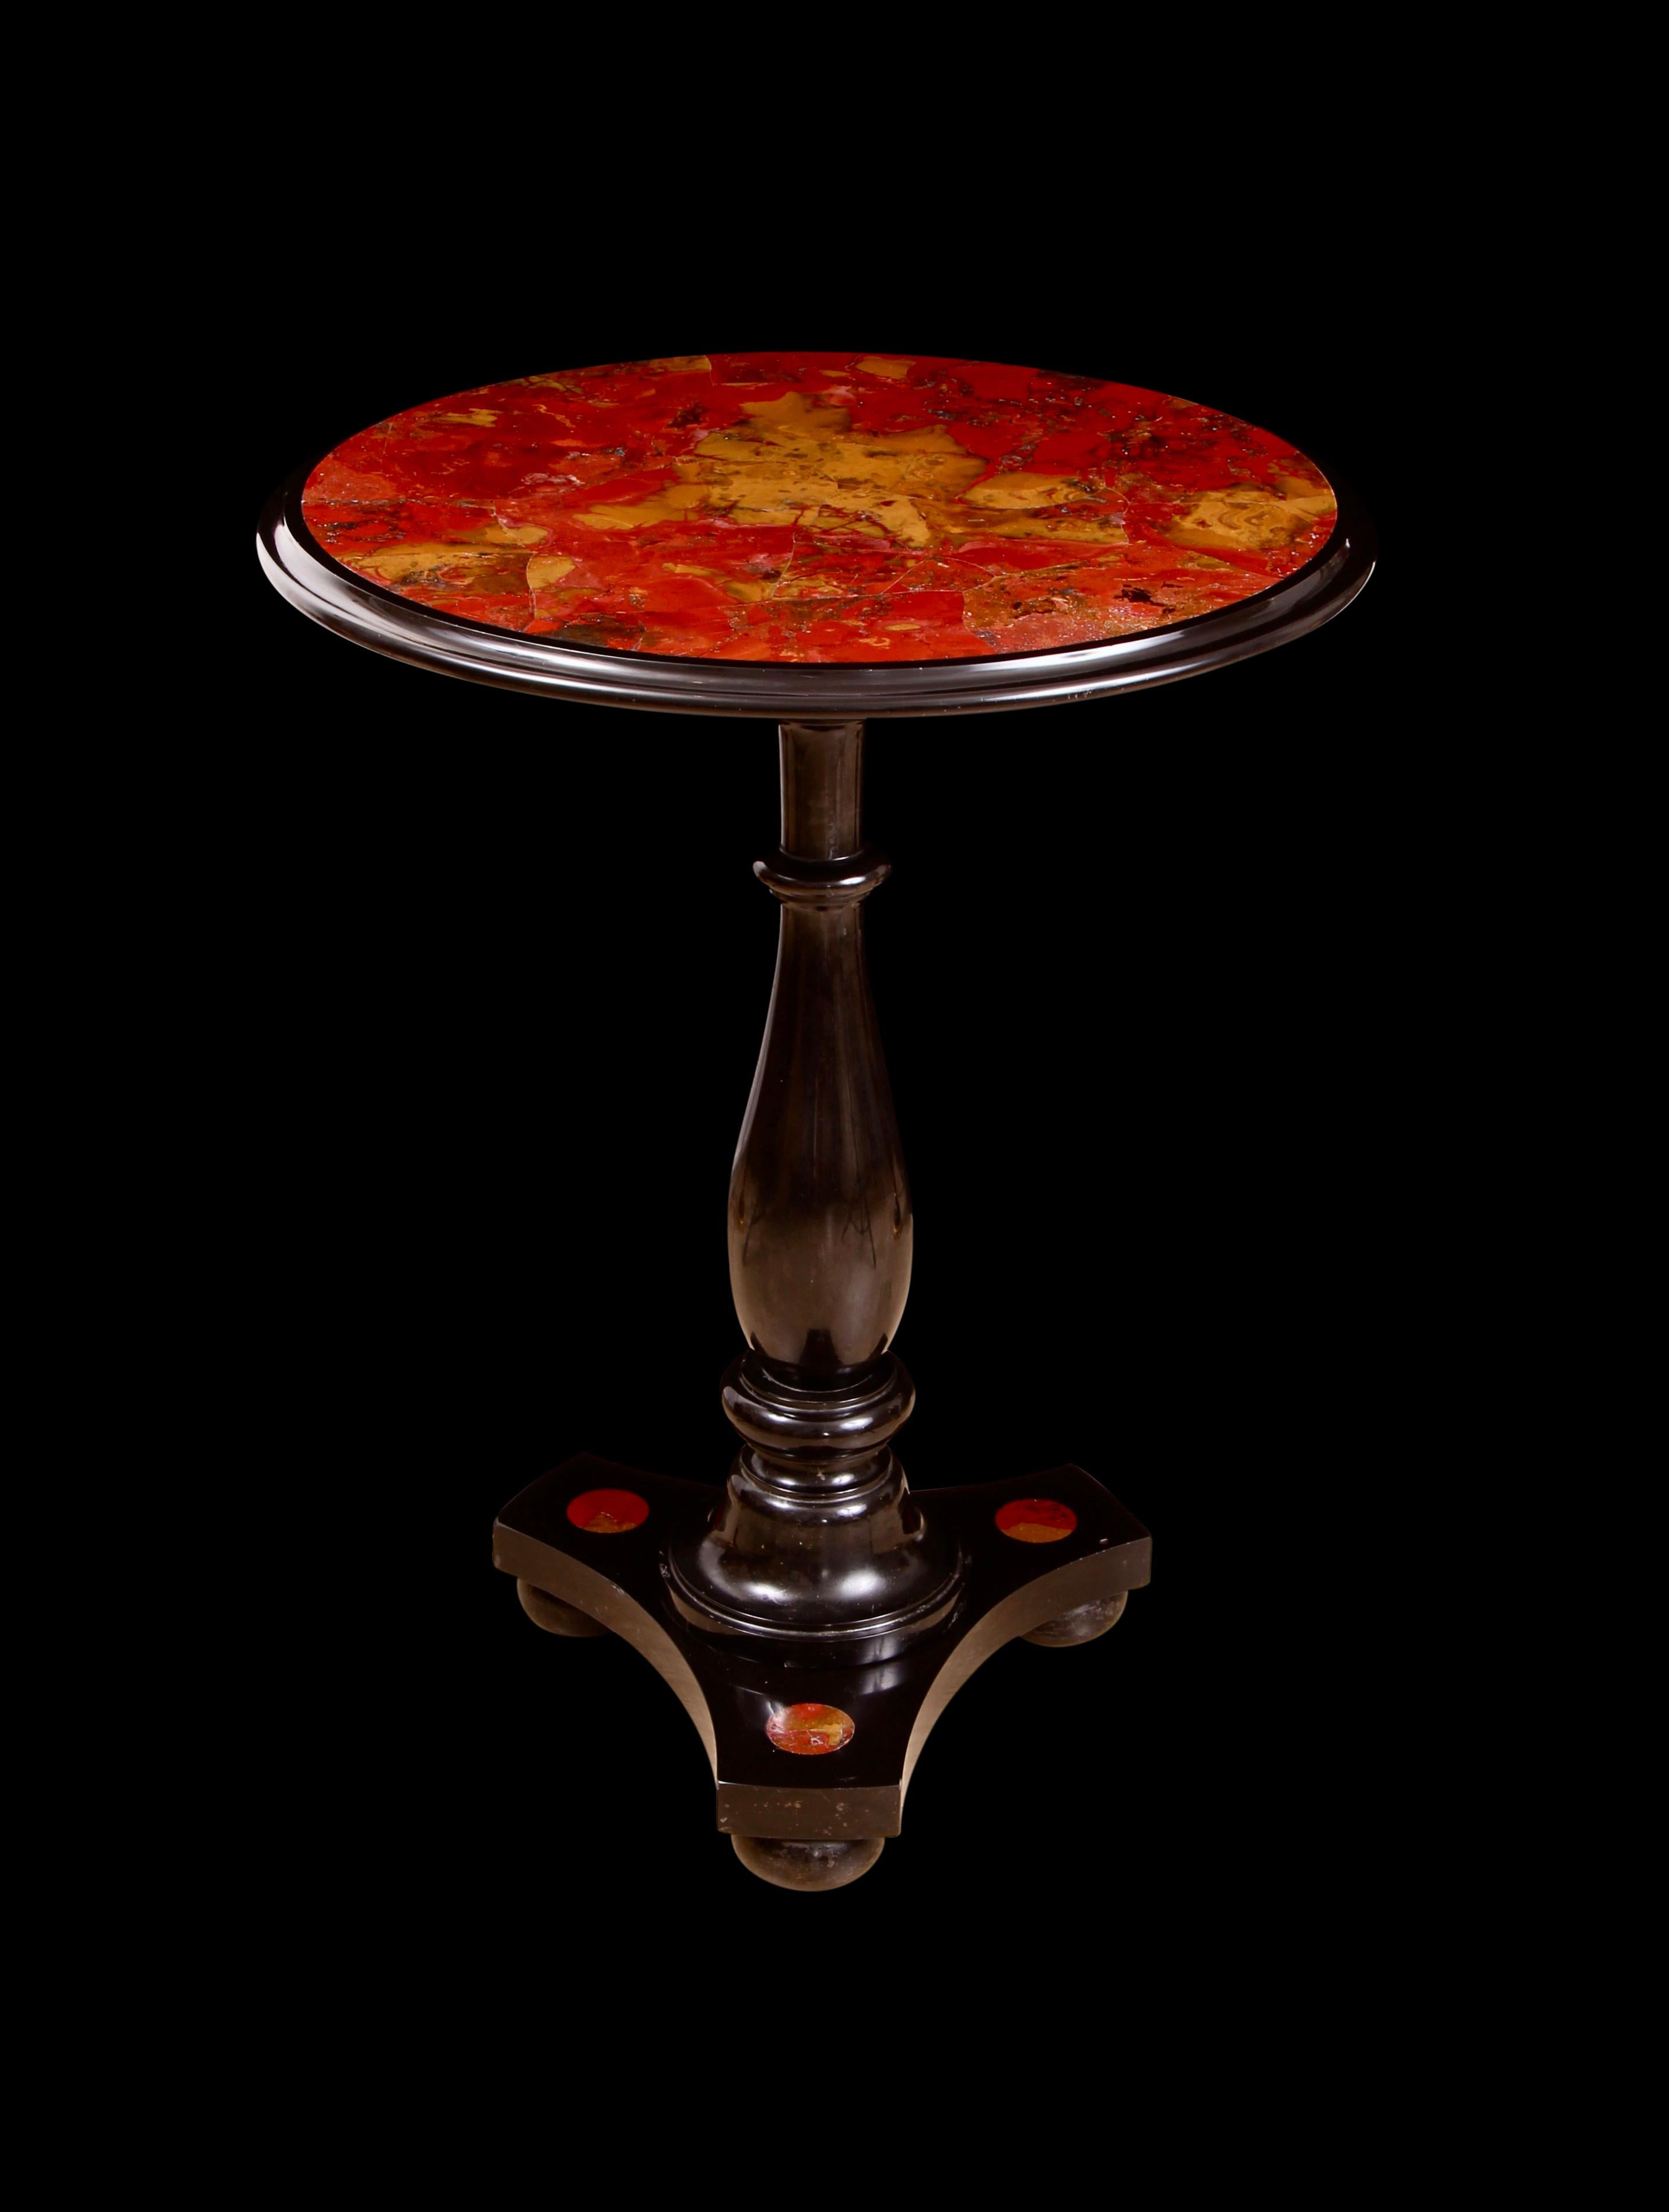 Rare 19th Century Florentine Sicilian Hardstone Agate Inlaid Black Marble Centre Table.

The lovely Pietra Dura piece, inlaid with the most stunningly rich and vivid Sicilian Hardstone Agate, fabulously contrasts to absolute perfection with the